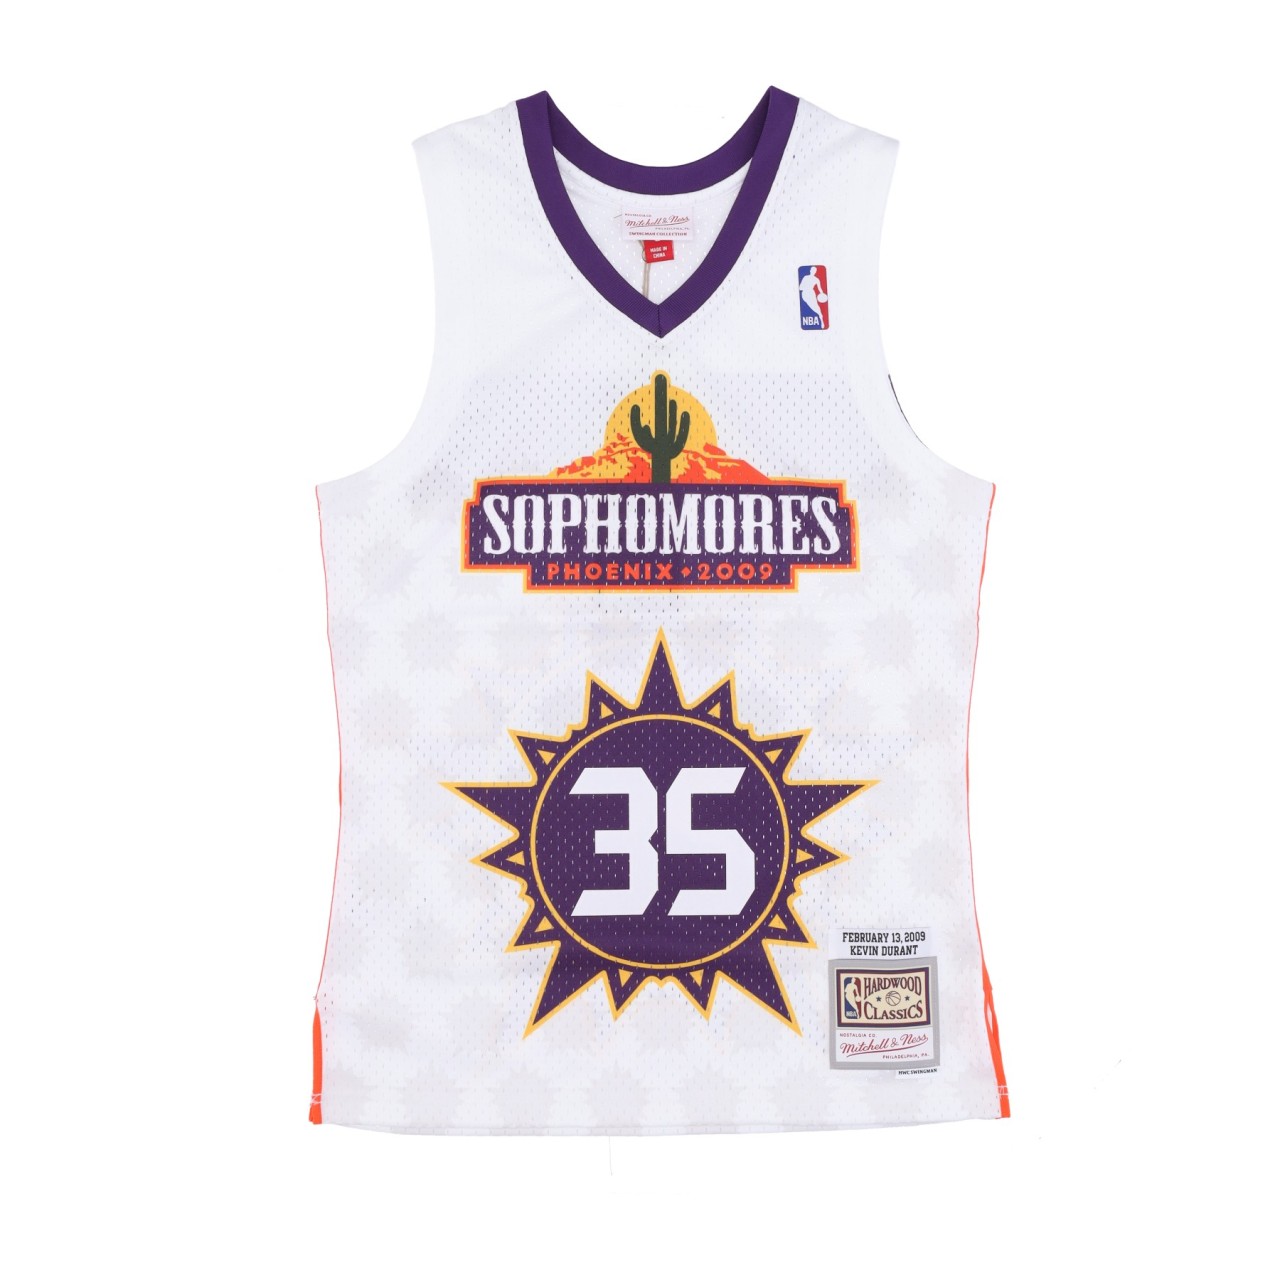 MITCHELL & NESS NBA RISING STARS SOPHOMORES JERSEY HARDWOOD CLASSICS NO 35 KEVIN DURANT 2009 SOPTEA SMJY4458-BST09KDUWHIT